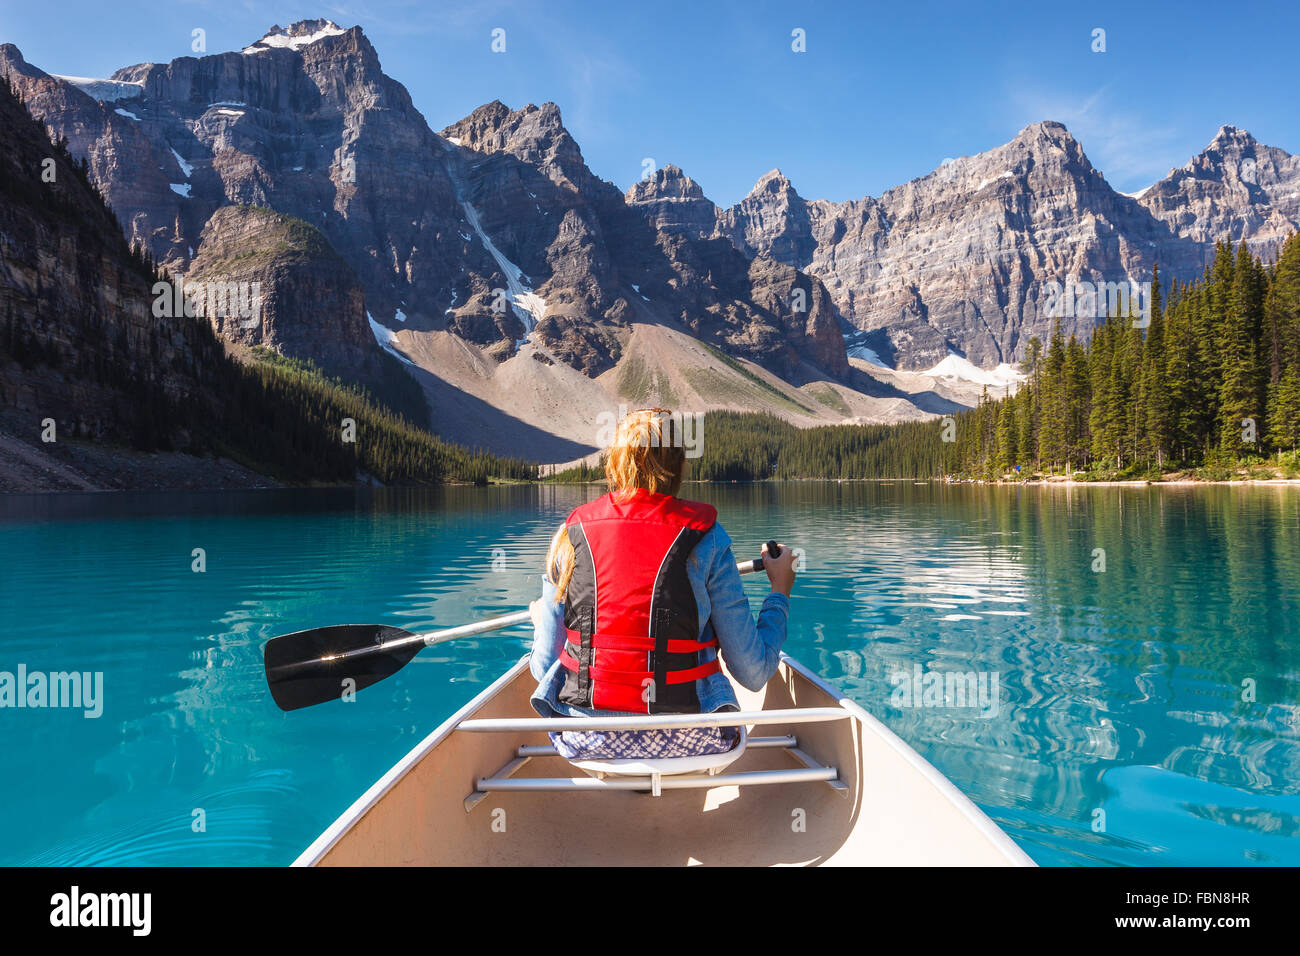 A young woman canoing at Moraine Lake, Banff National Park, Alberta, Canada, America (Canadian Rocky Mountains). Stock Photo